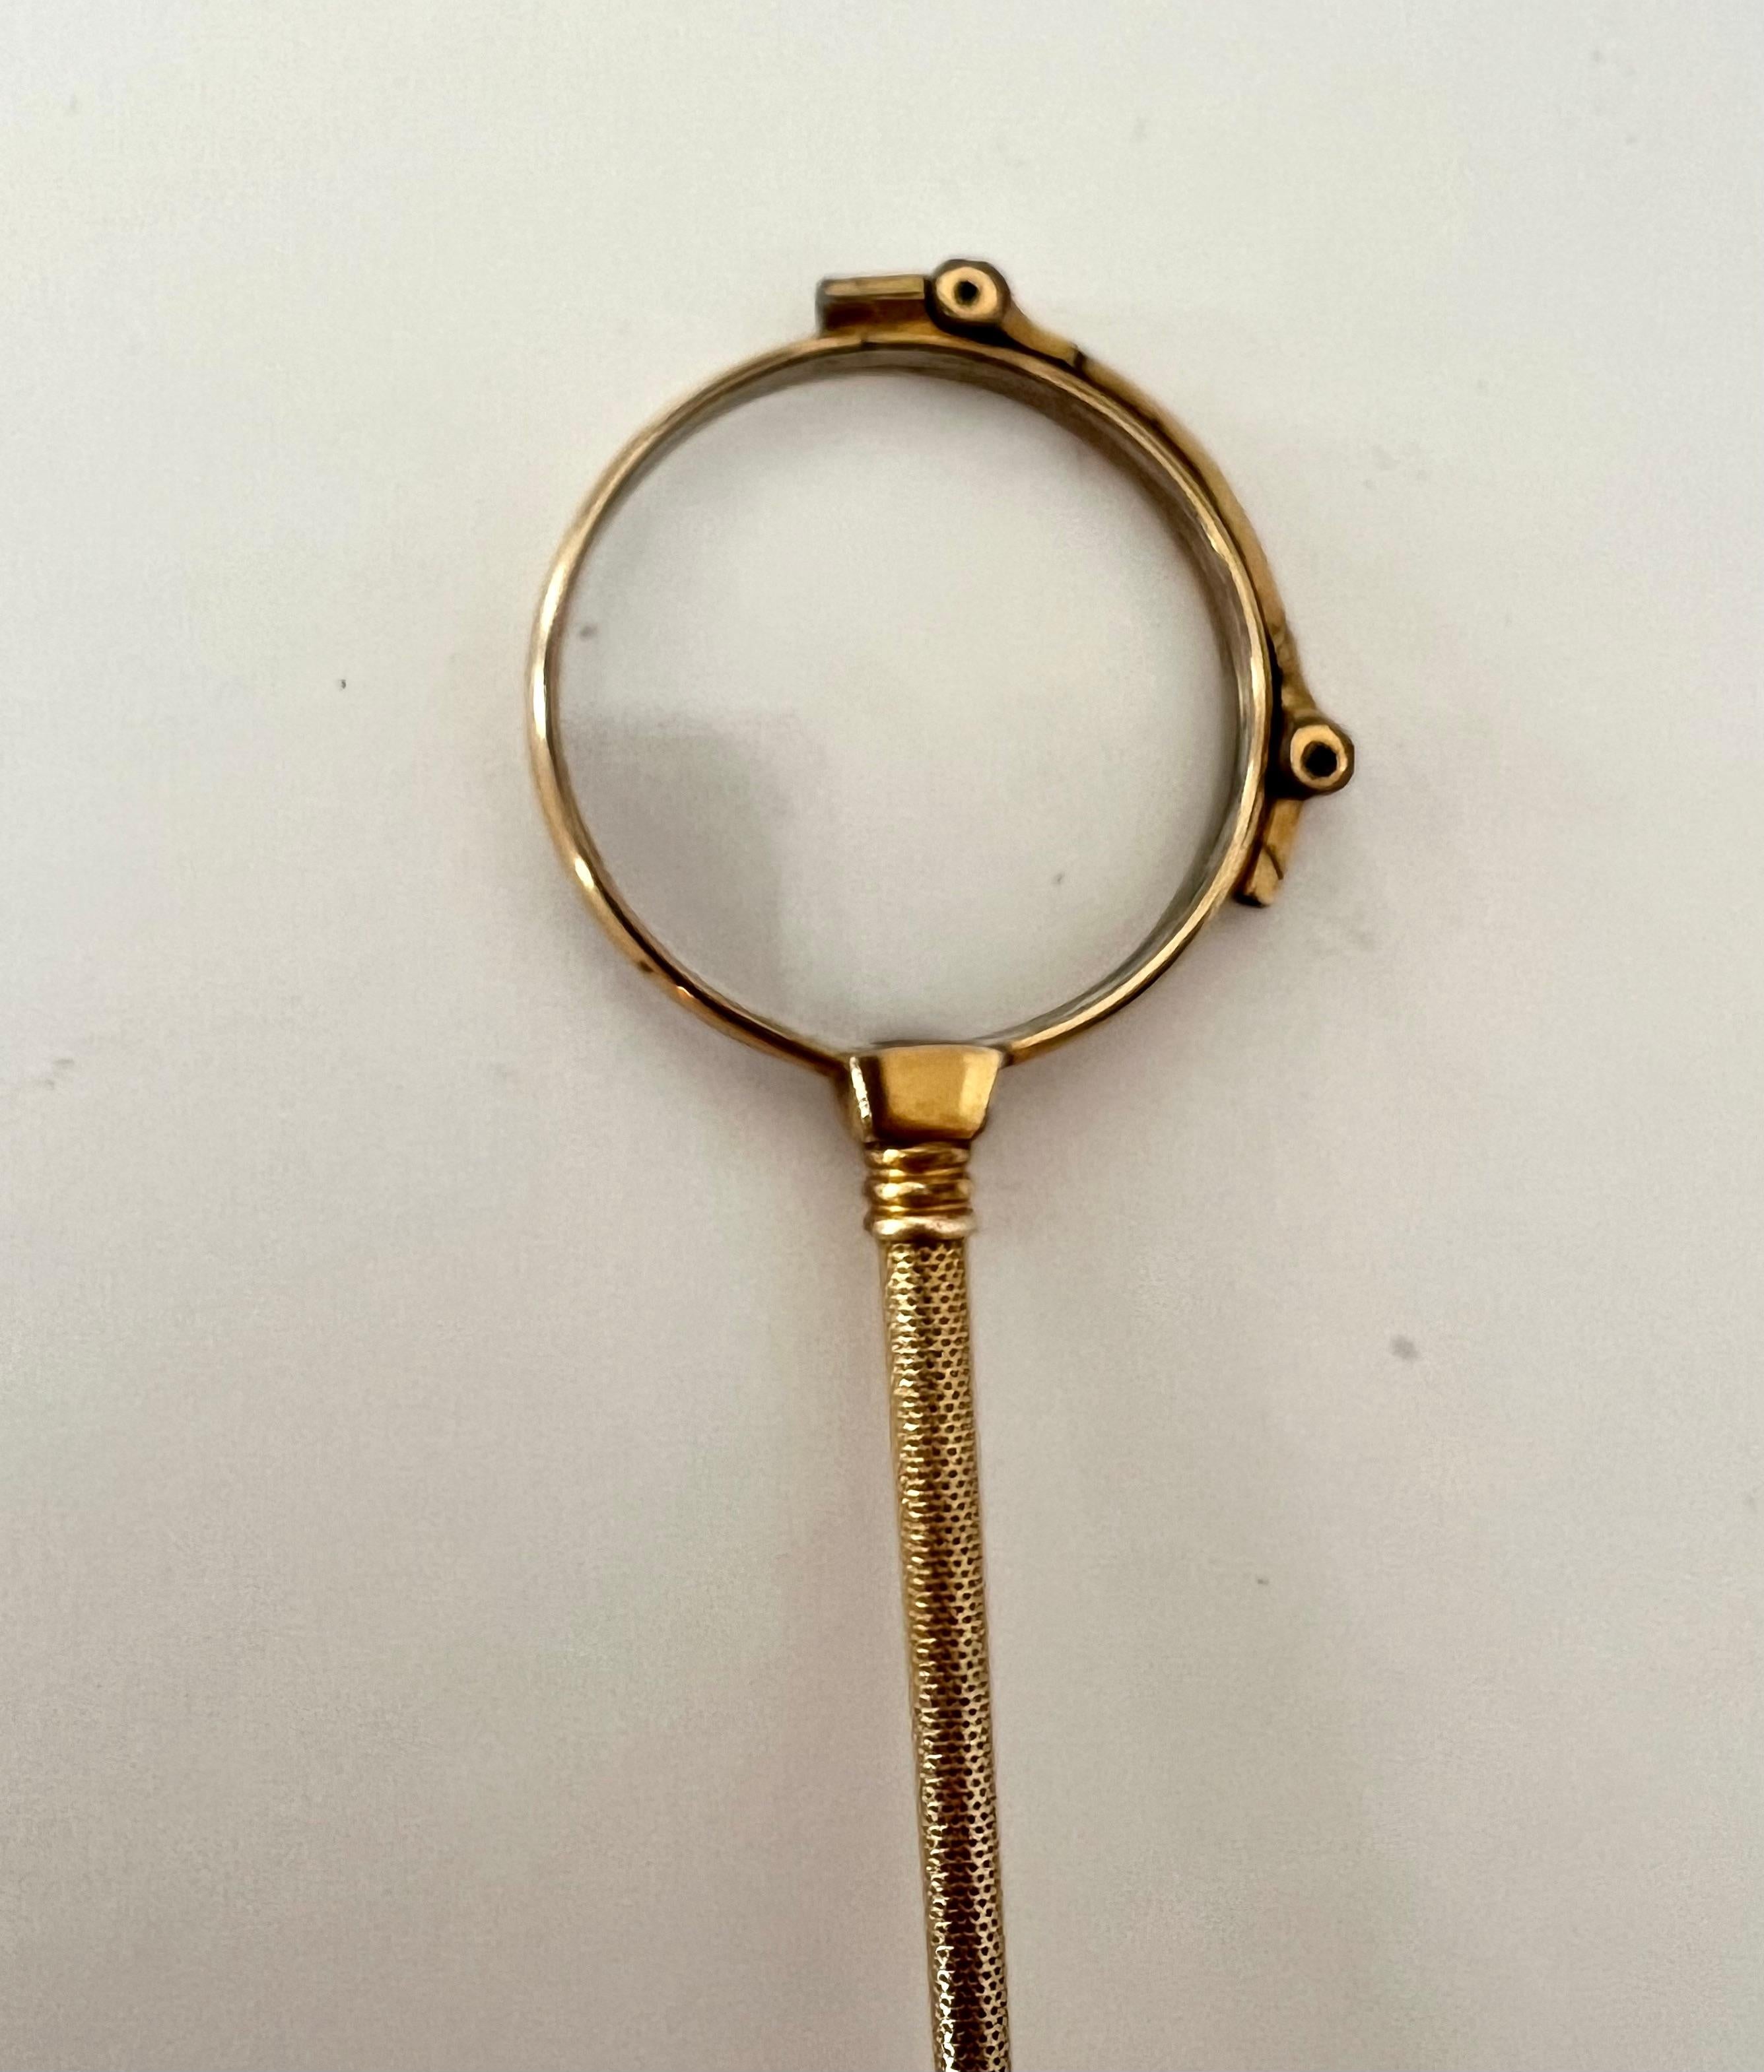 Hand-Crafted Gold Single Monocle Magnifyer Opening into a Lorgnette For Sale